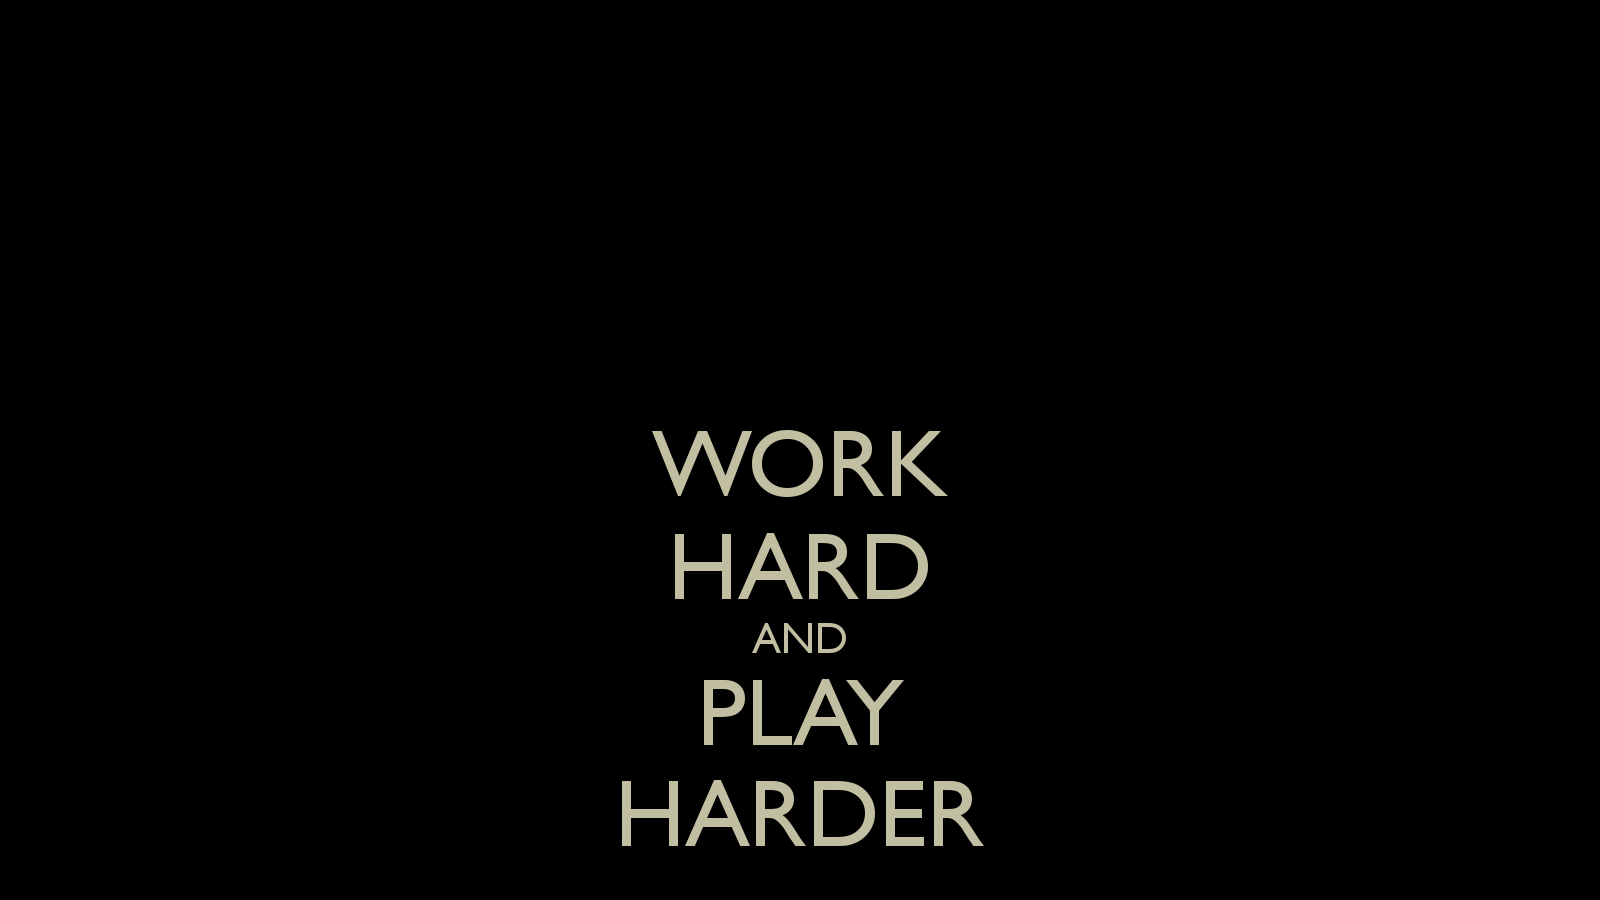 Work Hard And Play Harder Keep Calm Carry On Image Generator